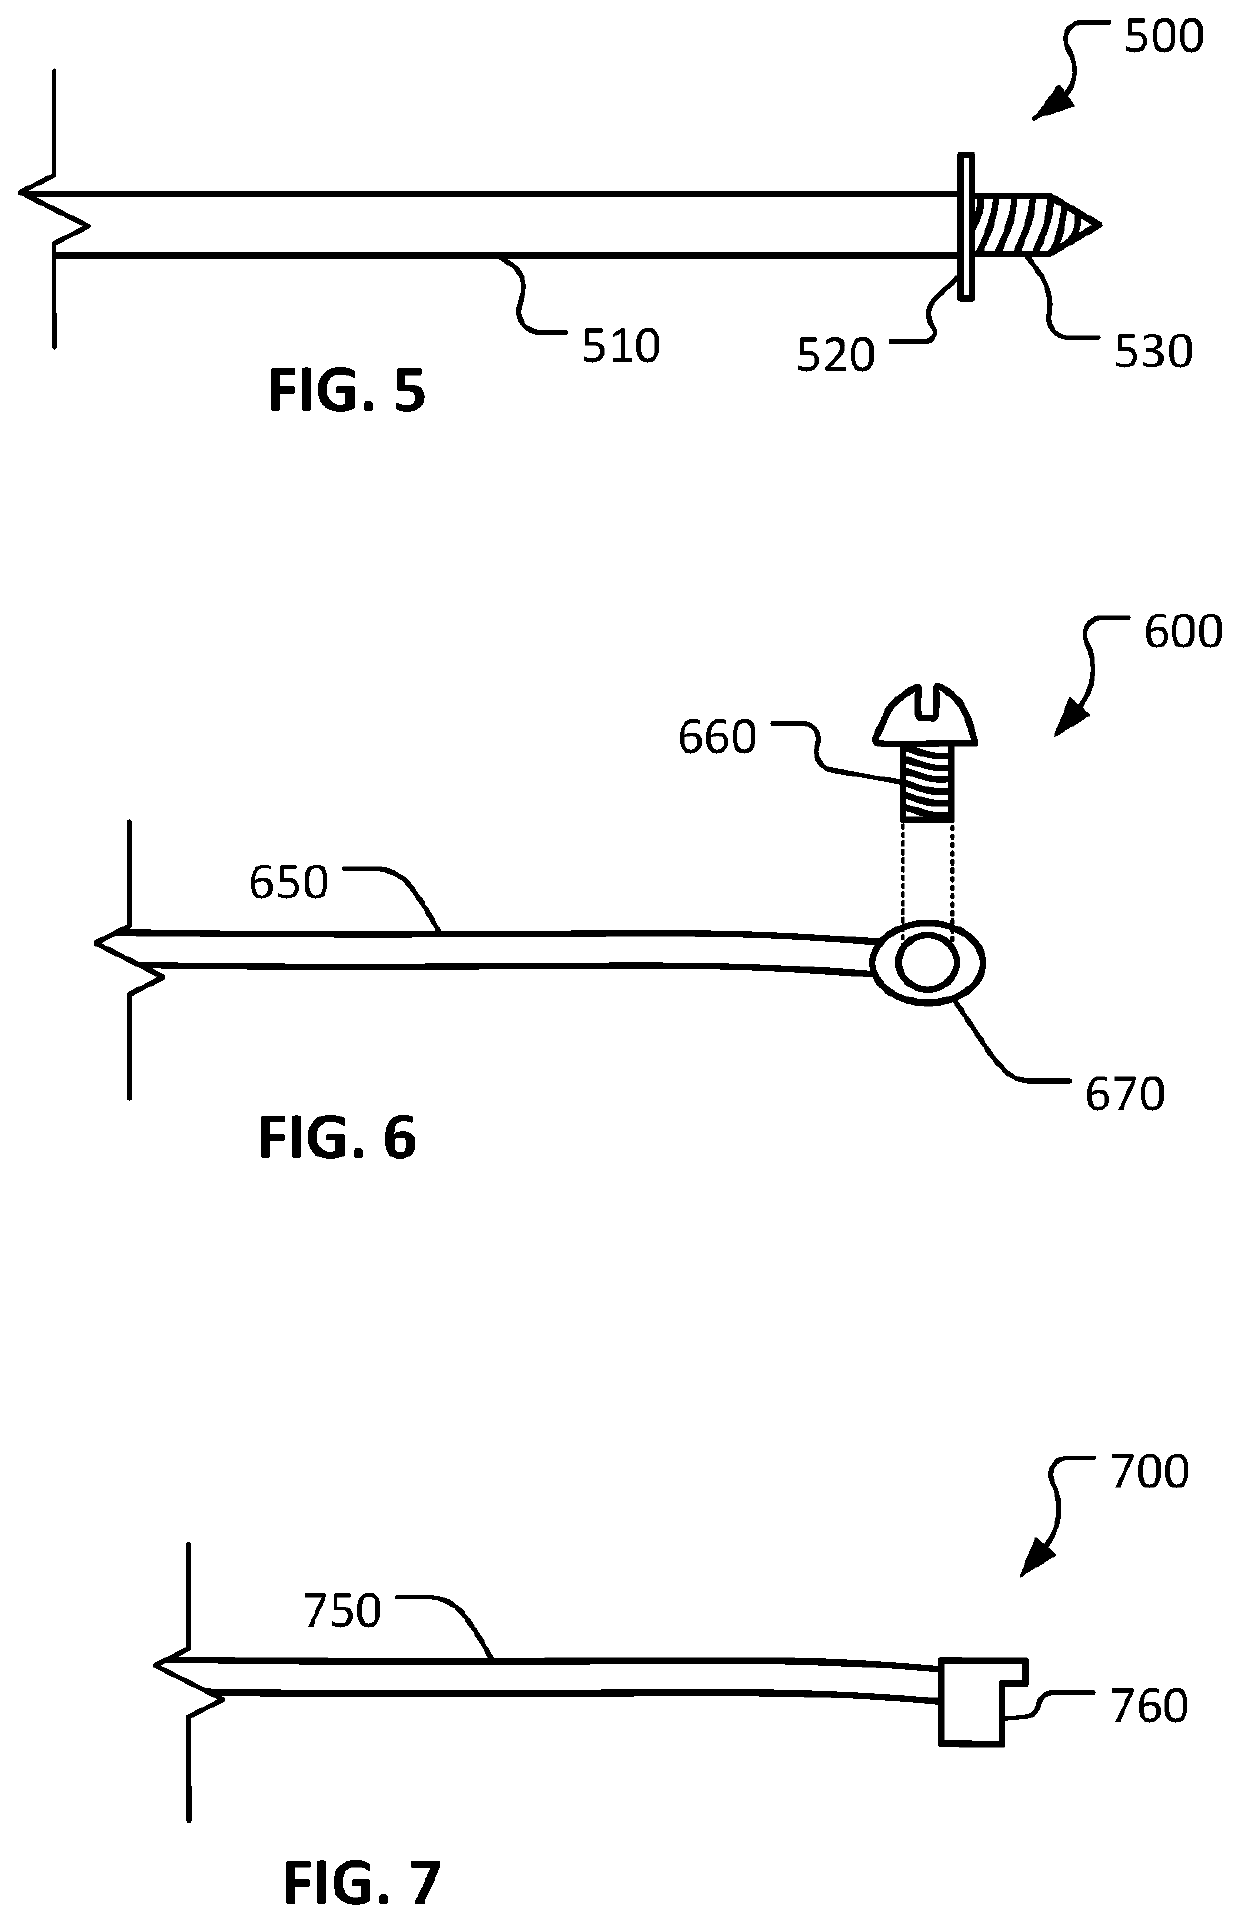 Devices and methods for treating tinnitus using electrical stimulation